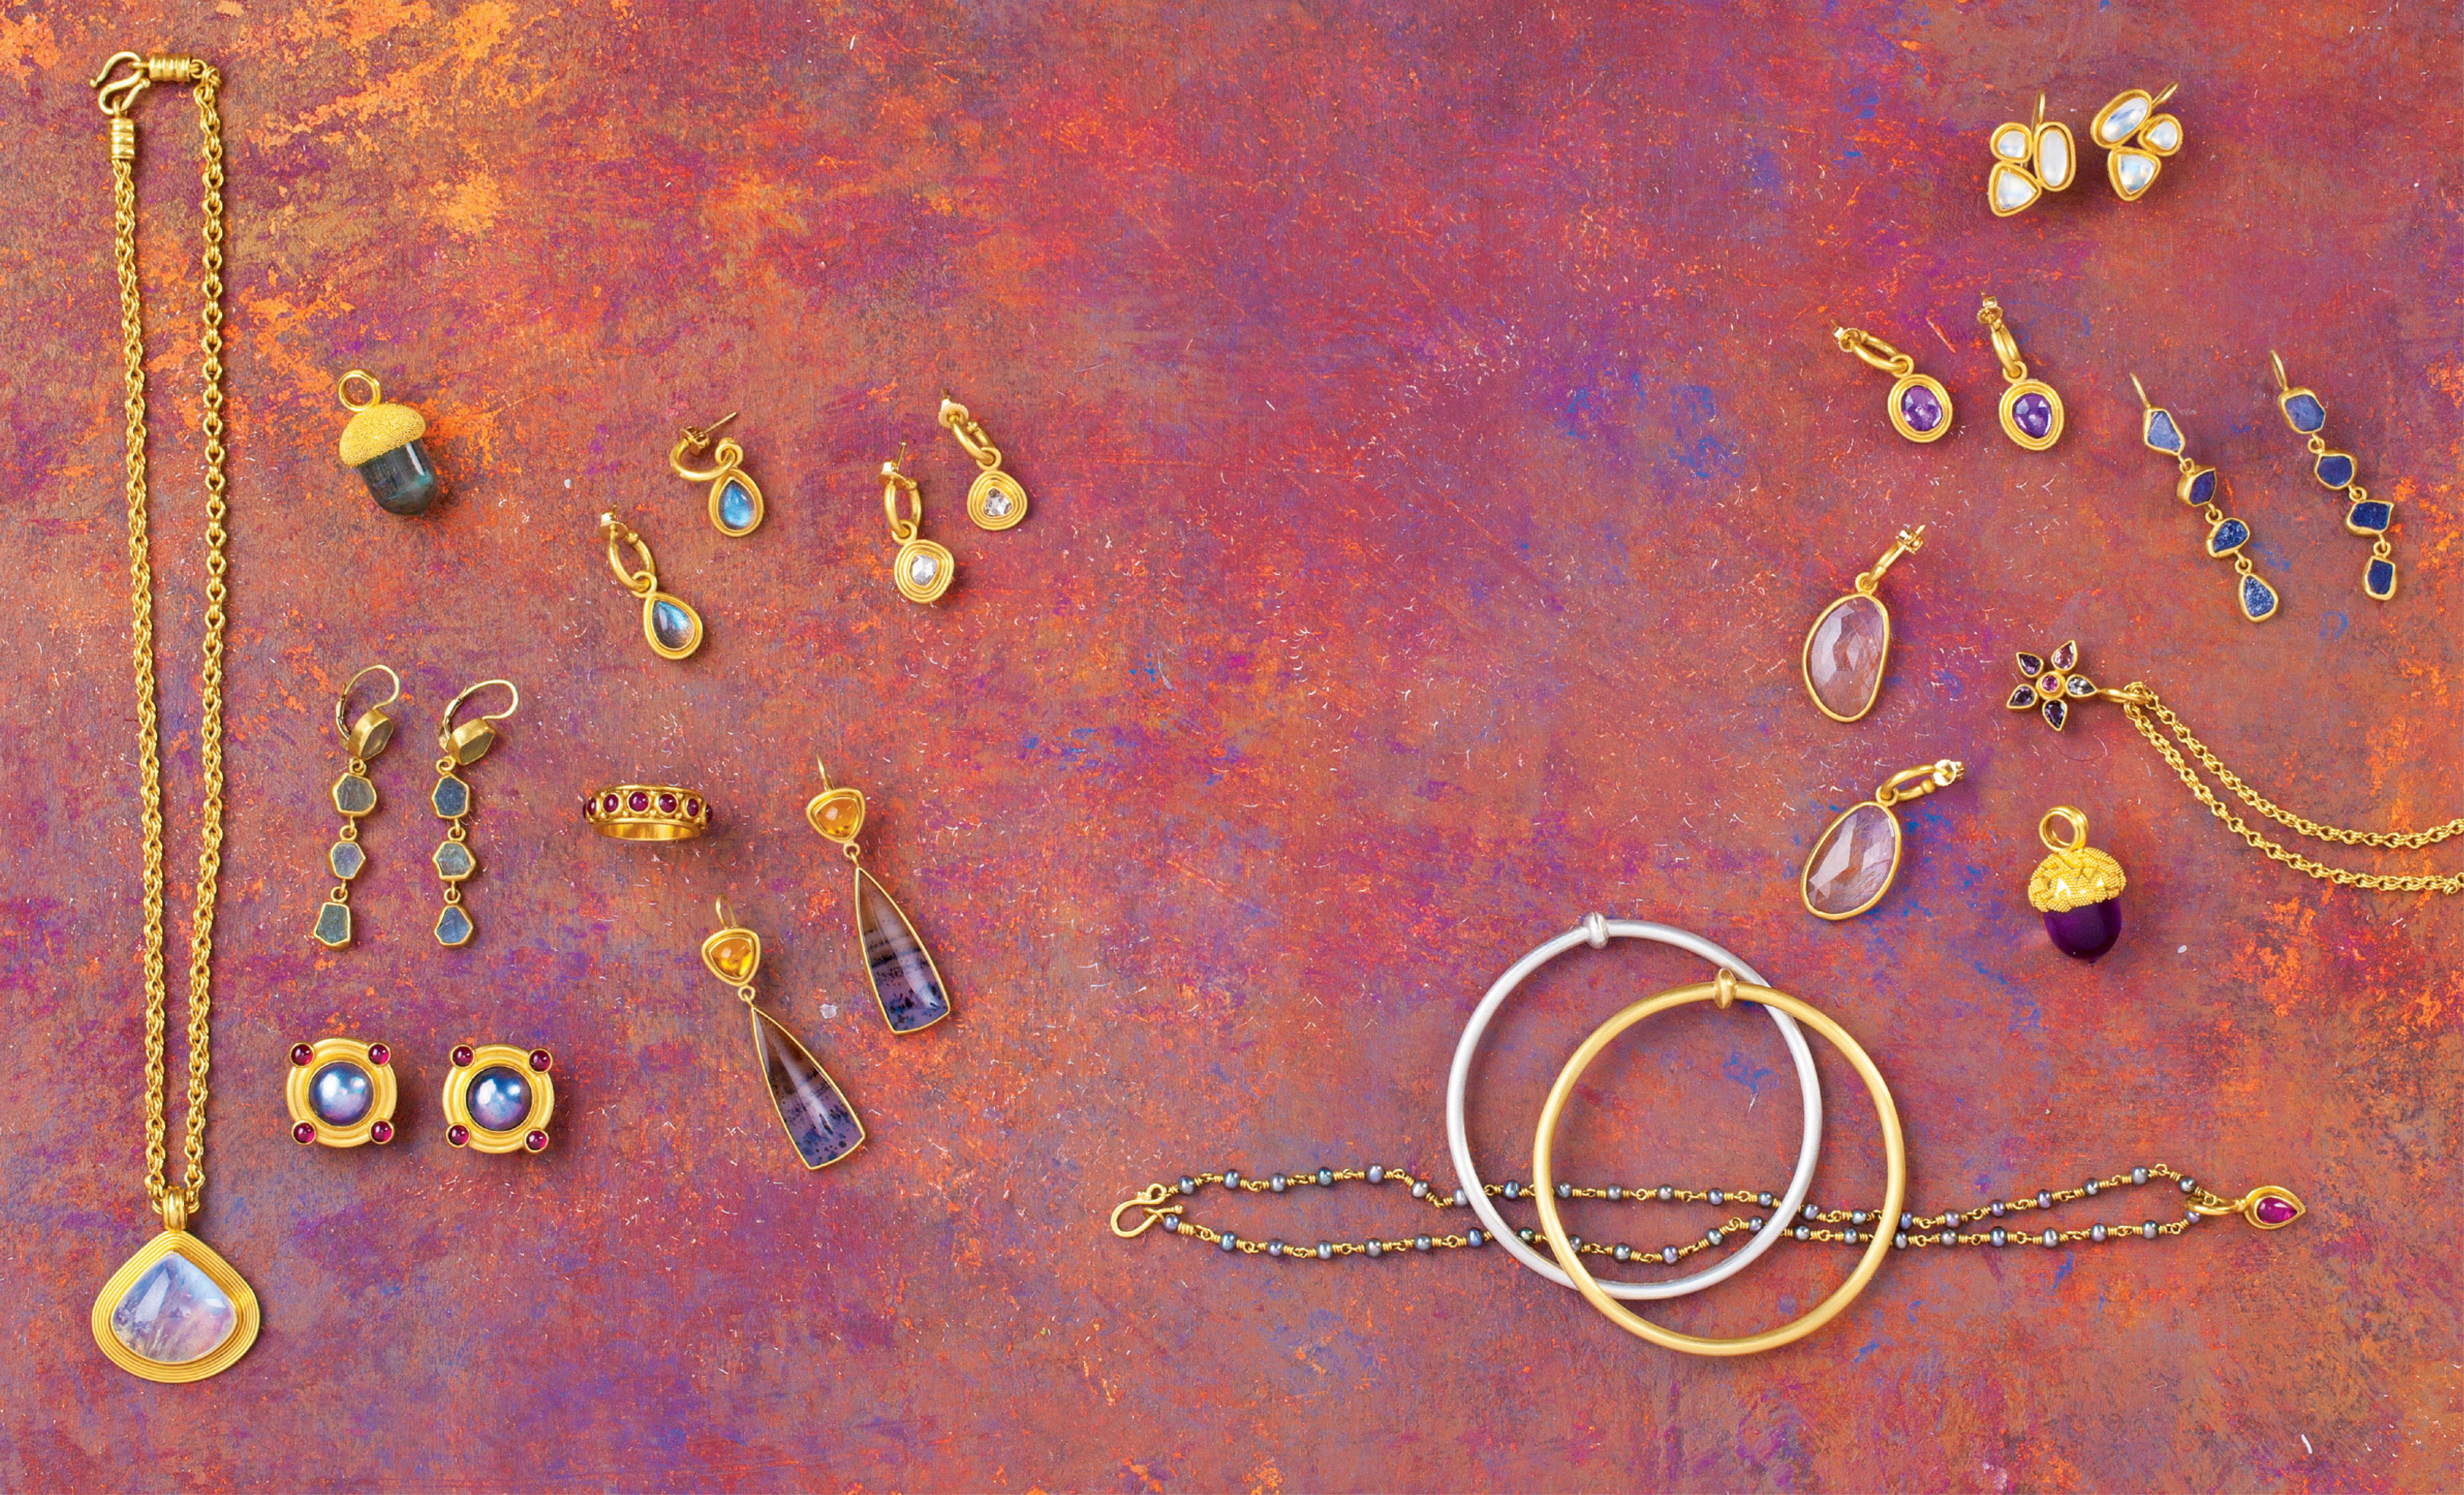 Sarah Amos: Fine jewelry collectors know a Sarah Amos piece when they see one; it’s all in the painstaking, handcrafted details, such as the individually placed gold granulation on her “Amethyst Acorn Pendant” (at right). The master goldsmith, who studied at Kulicke-Stark Academy of Jewelry, uses ancient techniques to transform 22K gold and precious and semiprecious stones into gorgeous, one-of-a-kind pendants, earrings, rings, and more. “My jewelry is informed by classical techniques, but the results must be wearable and have a contemporary aesthetic,” says the artist, whose work is available at Helena Fox Fine Art, helenafoxfineart.com.